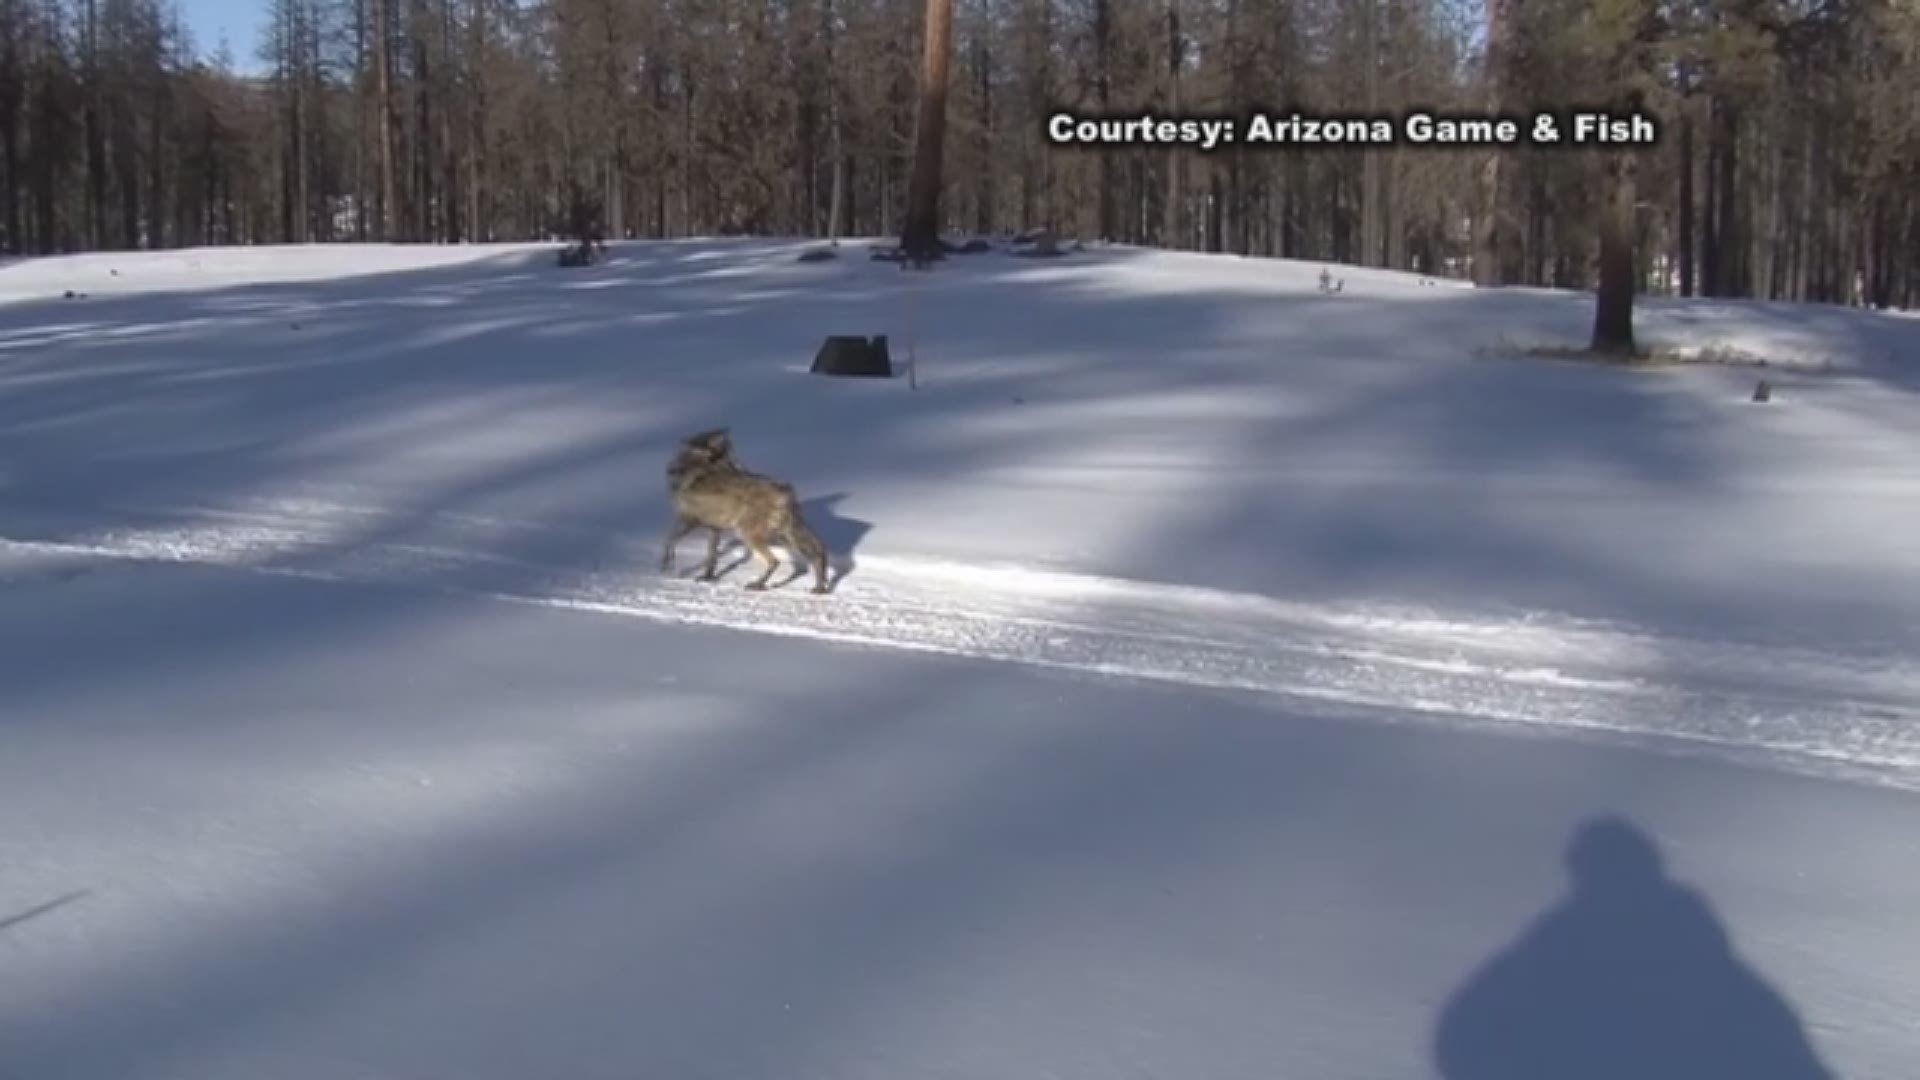 As part of the Mexican Wolf Recovery Project, The Arizona Game and Fish Department participates in the study and management of this endangered species. This video follows biologists as they capture, GPS collar and release young wolves back into the wild i